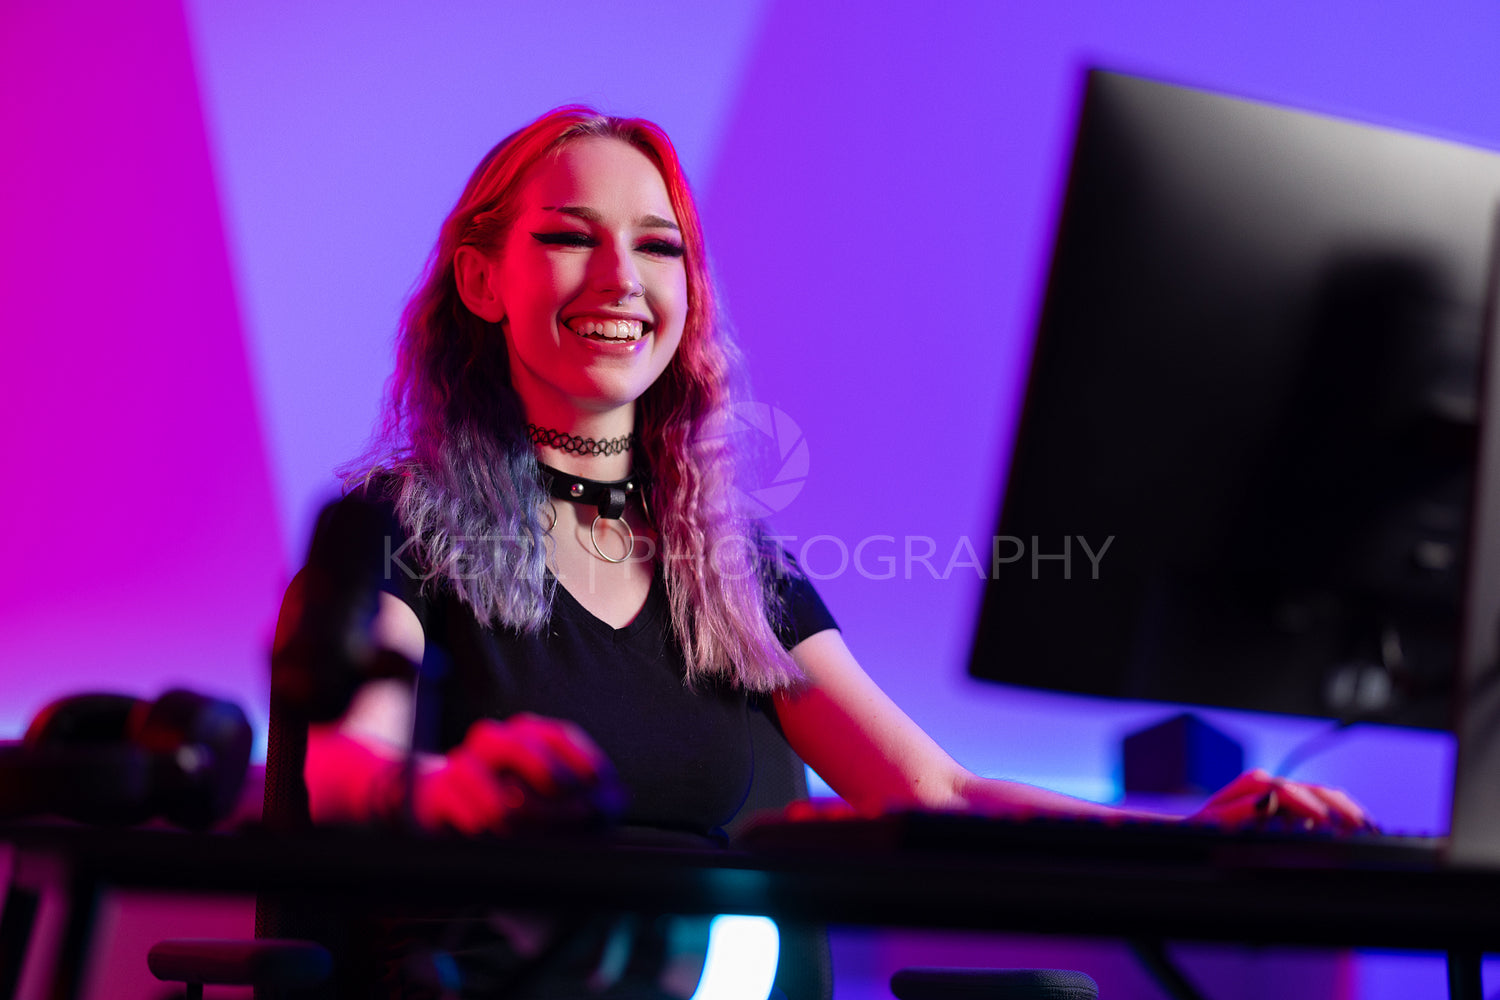 Focused and Happy Professional Gamer Engaged in an Intense Gaming Session